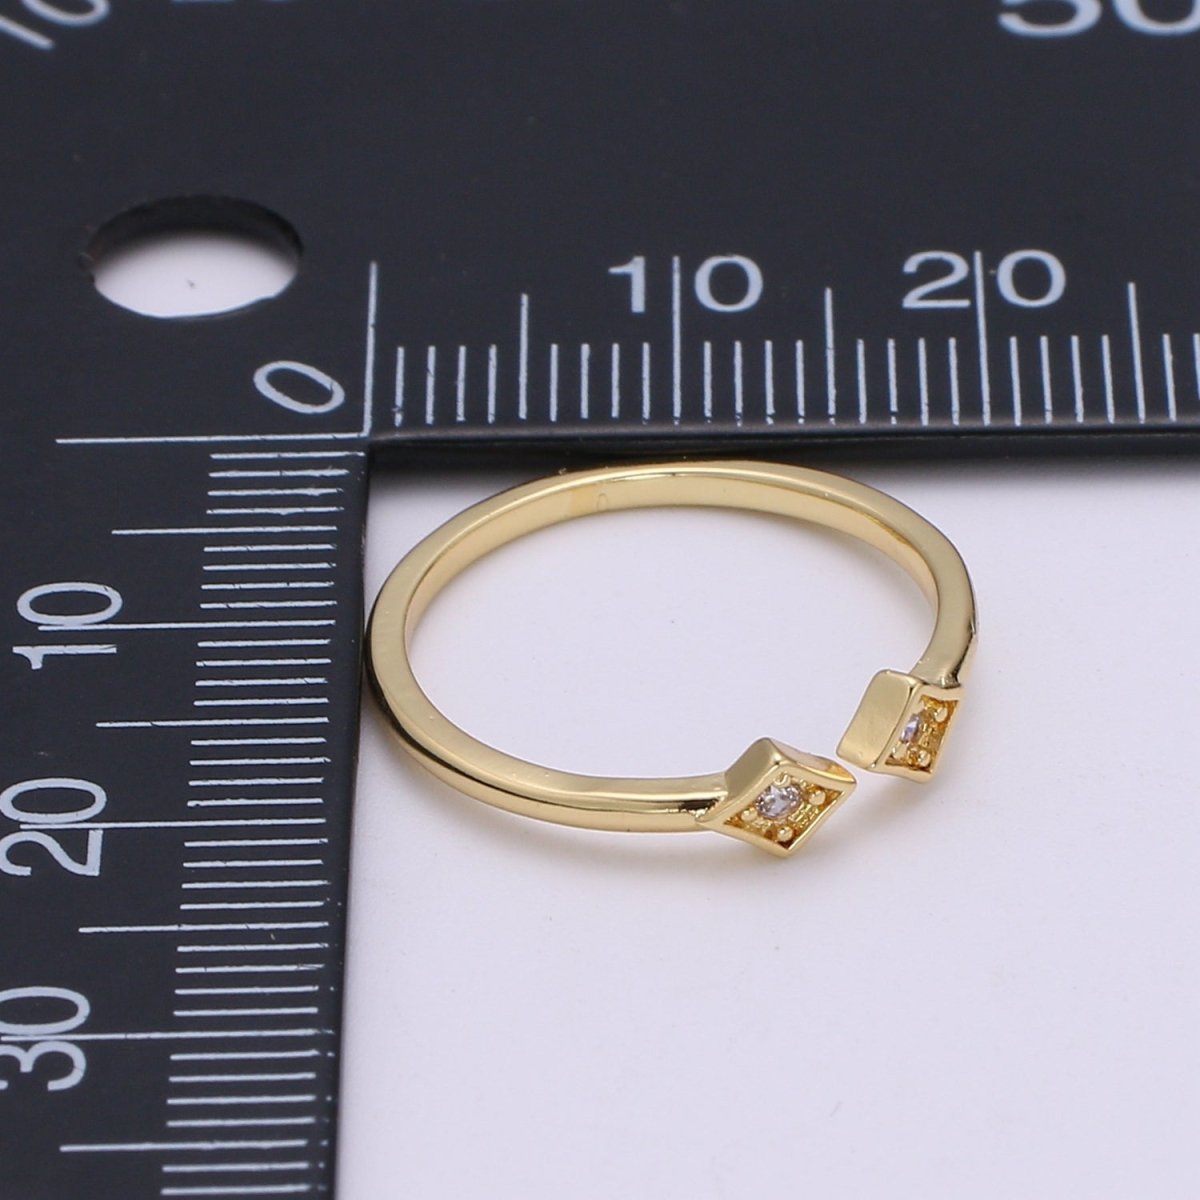 Tiny Ring, Minimalist Ring, Stackable Ring, Thin Ring, Dainty Ring, Trendy Ring, Rhombus Ring, Gold Ring Geometric Jewelry Gift idea O-288 - DLUXCA